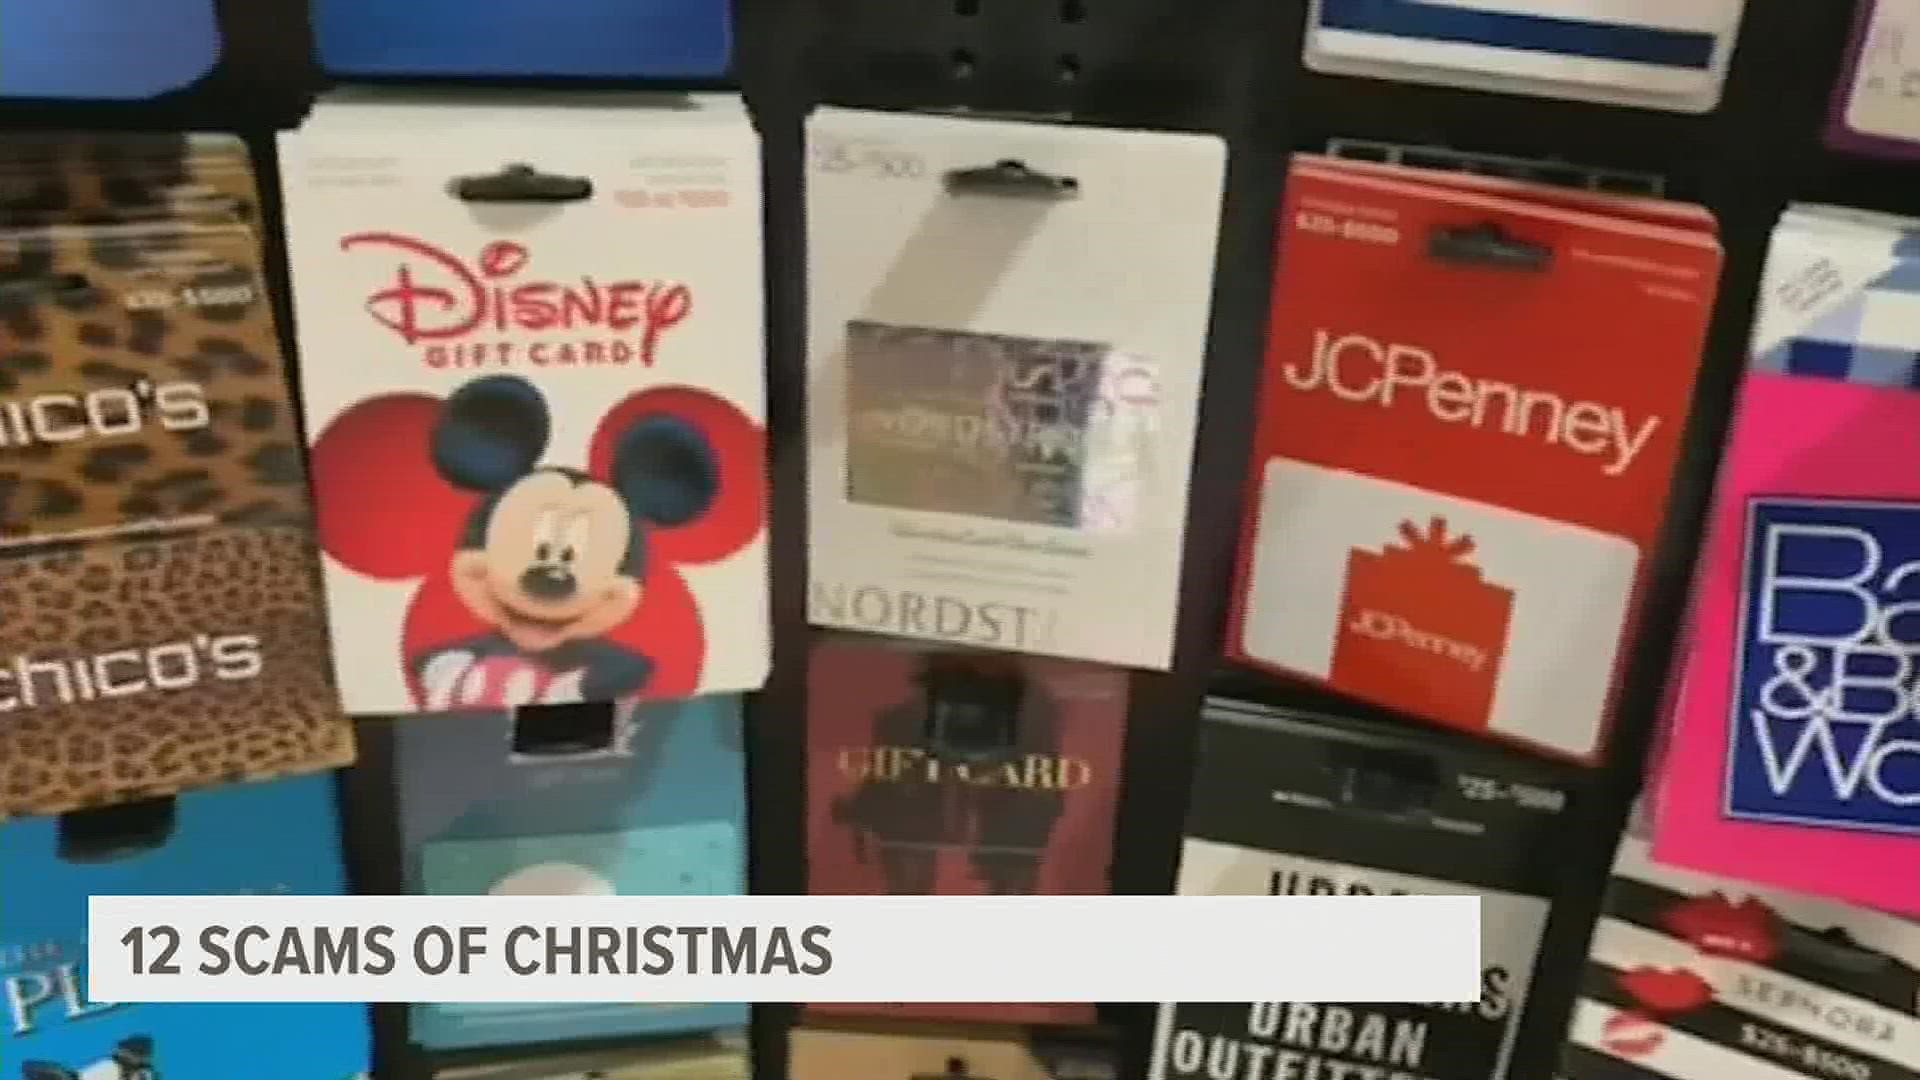 Gift card scams made our list of scams this holiday season.